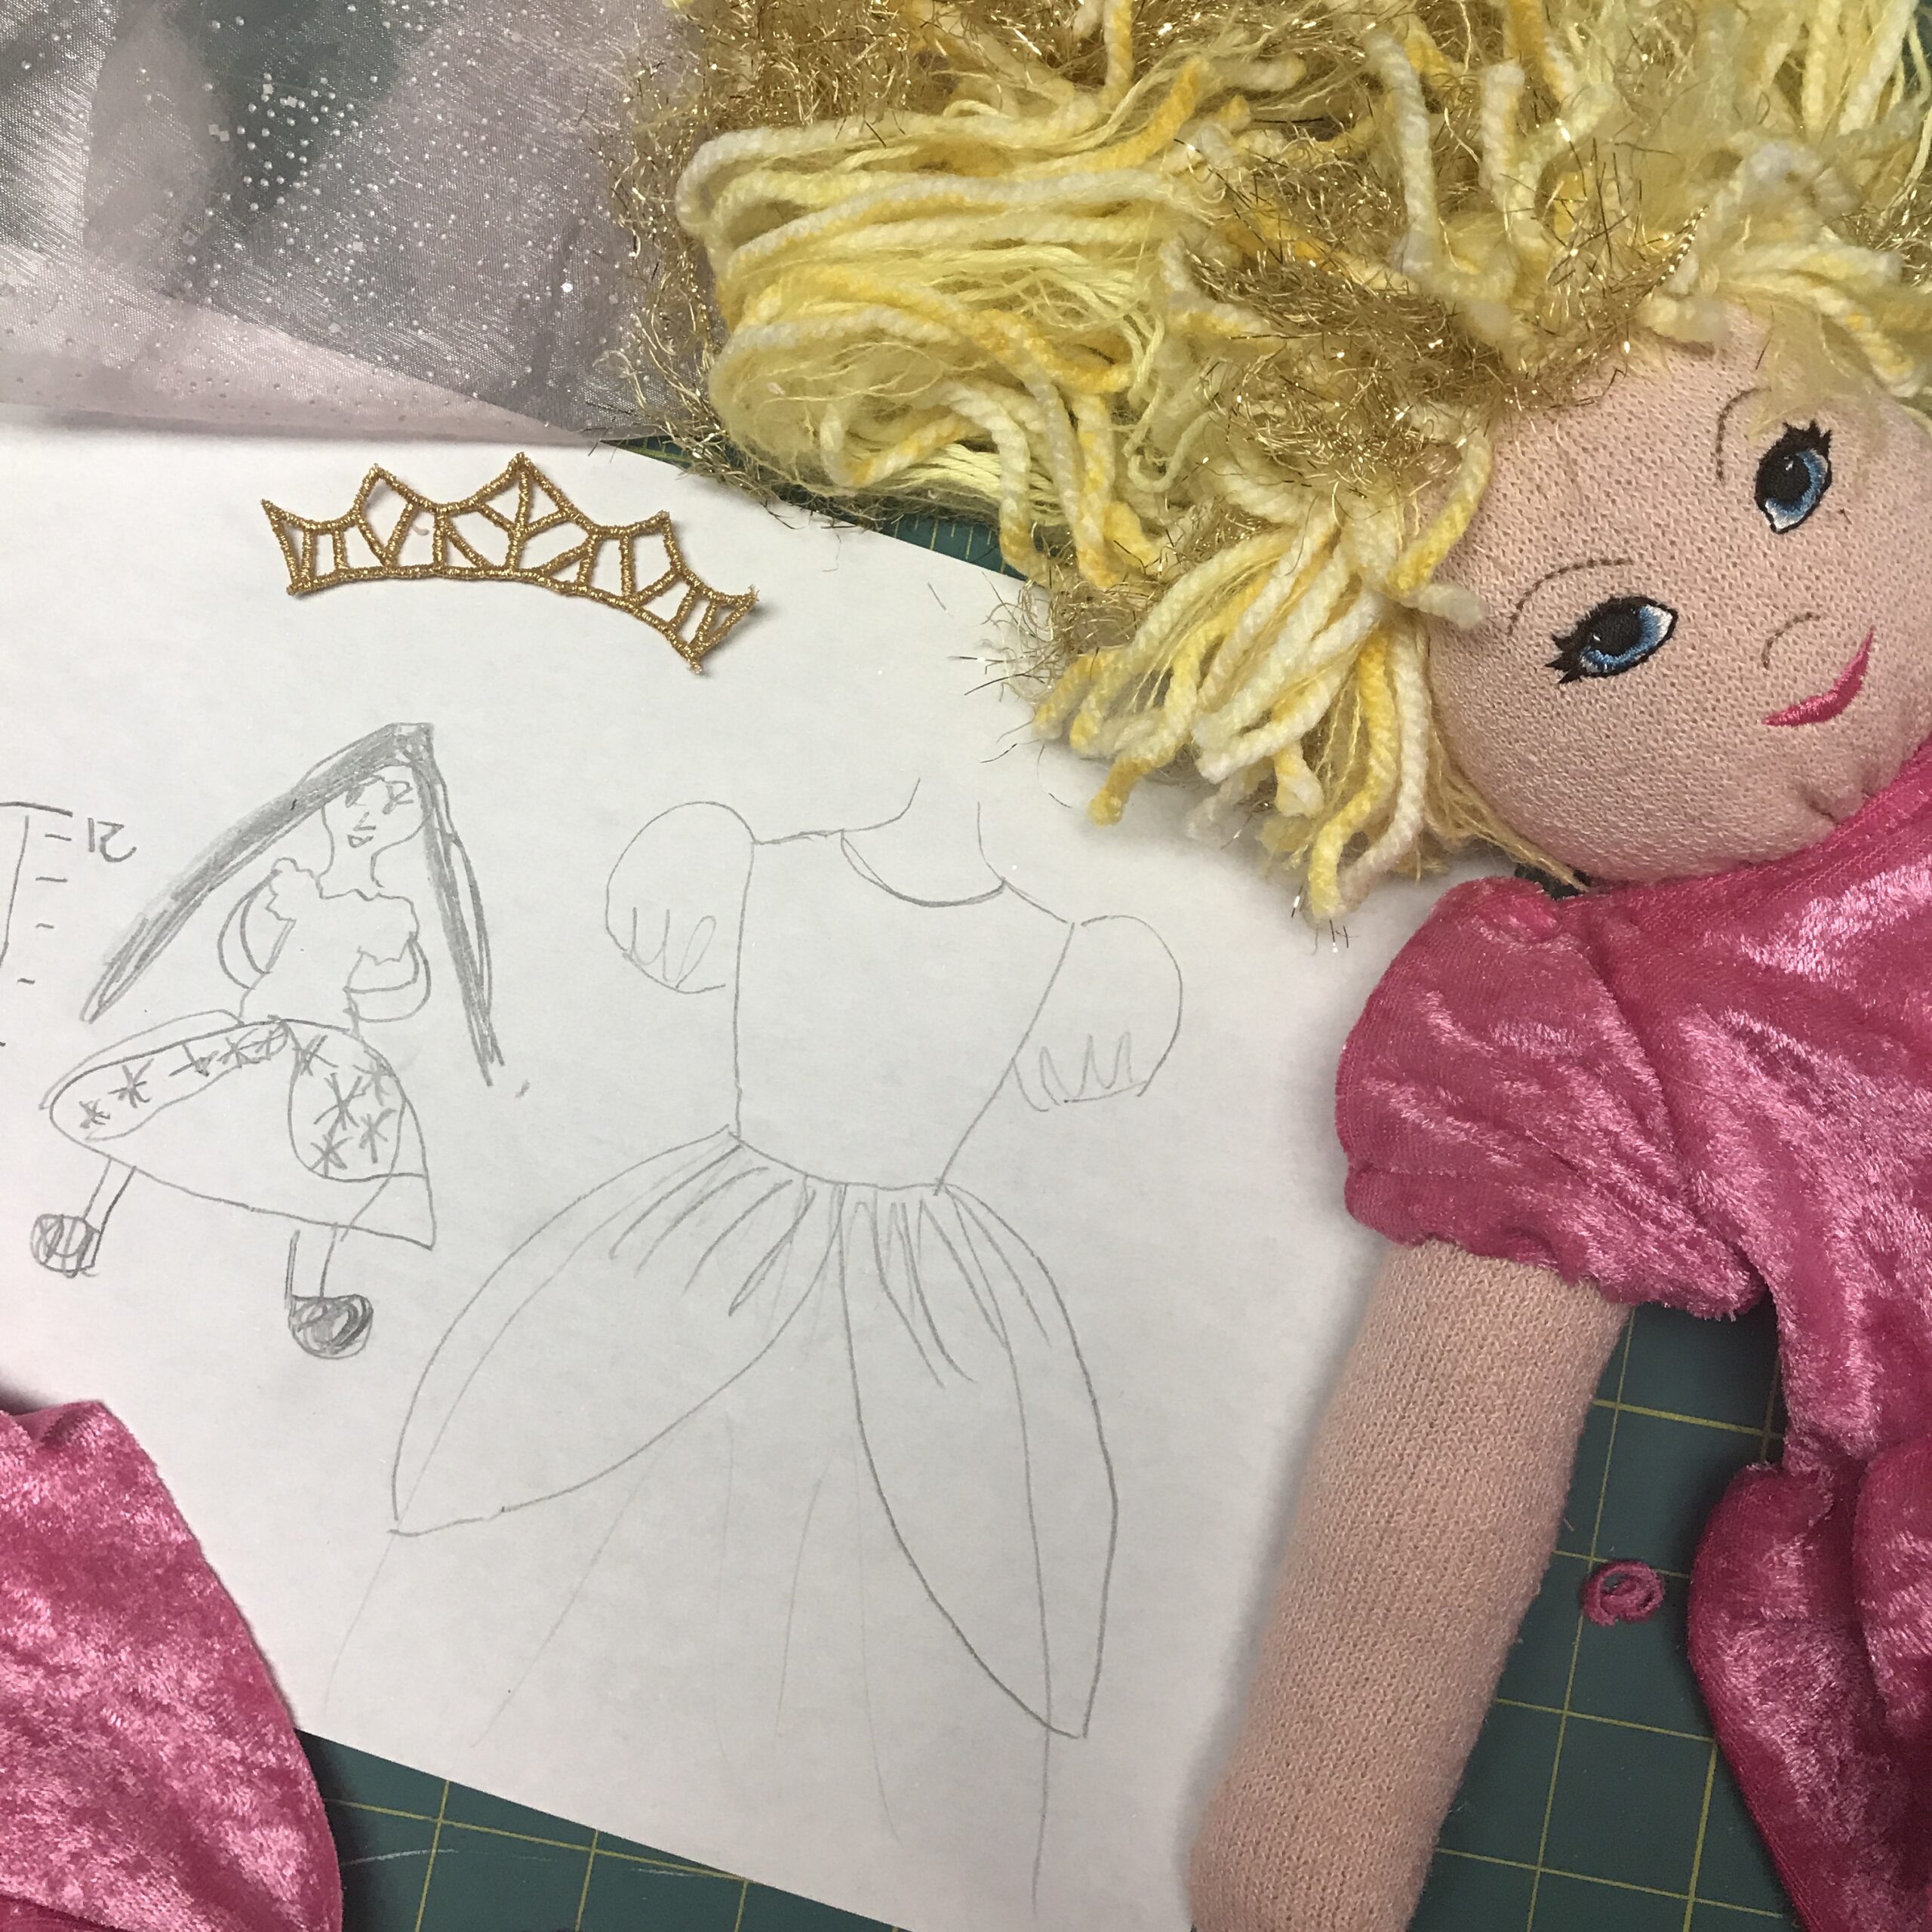 Designing a sock doll princess dress - princess face and crown machine embroidery designs by A Bit of Stitch